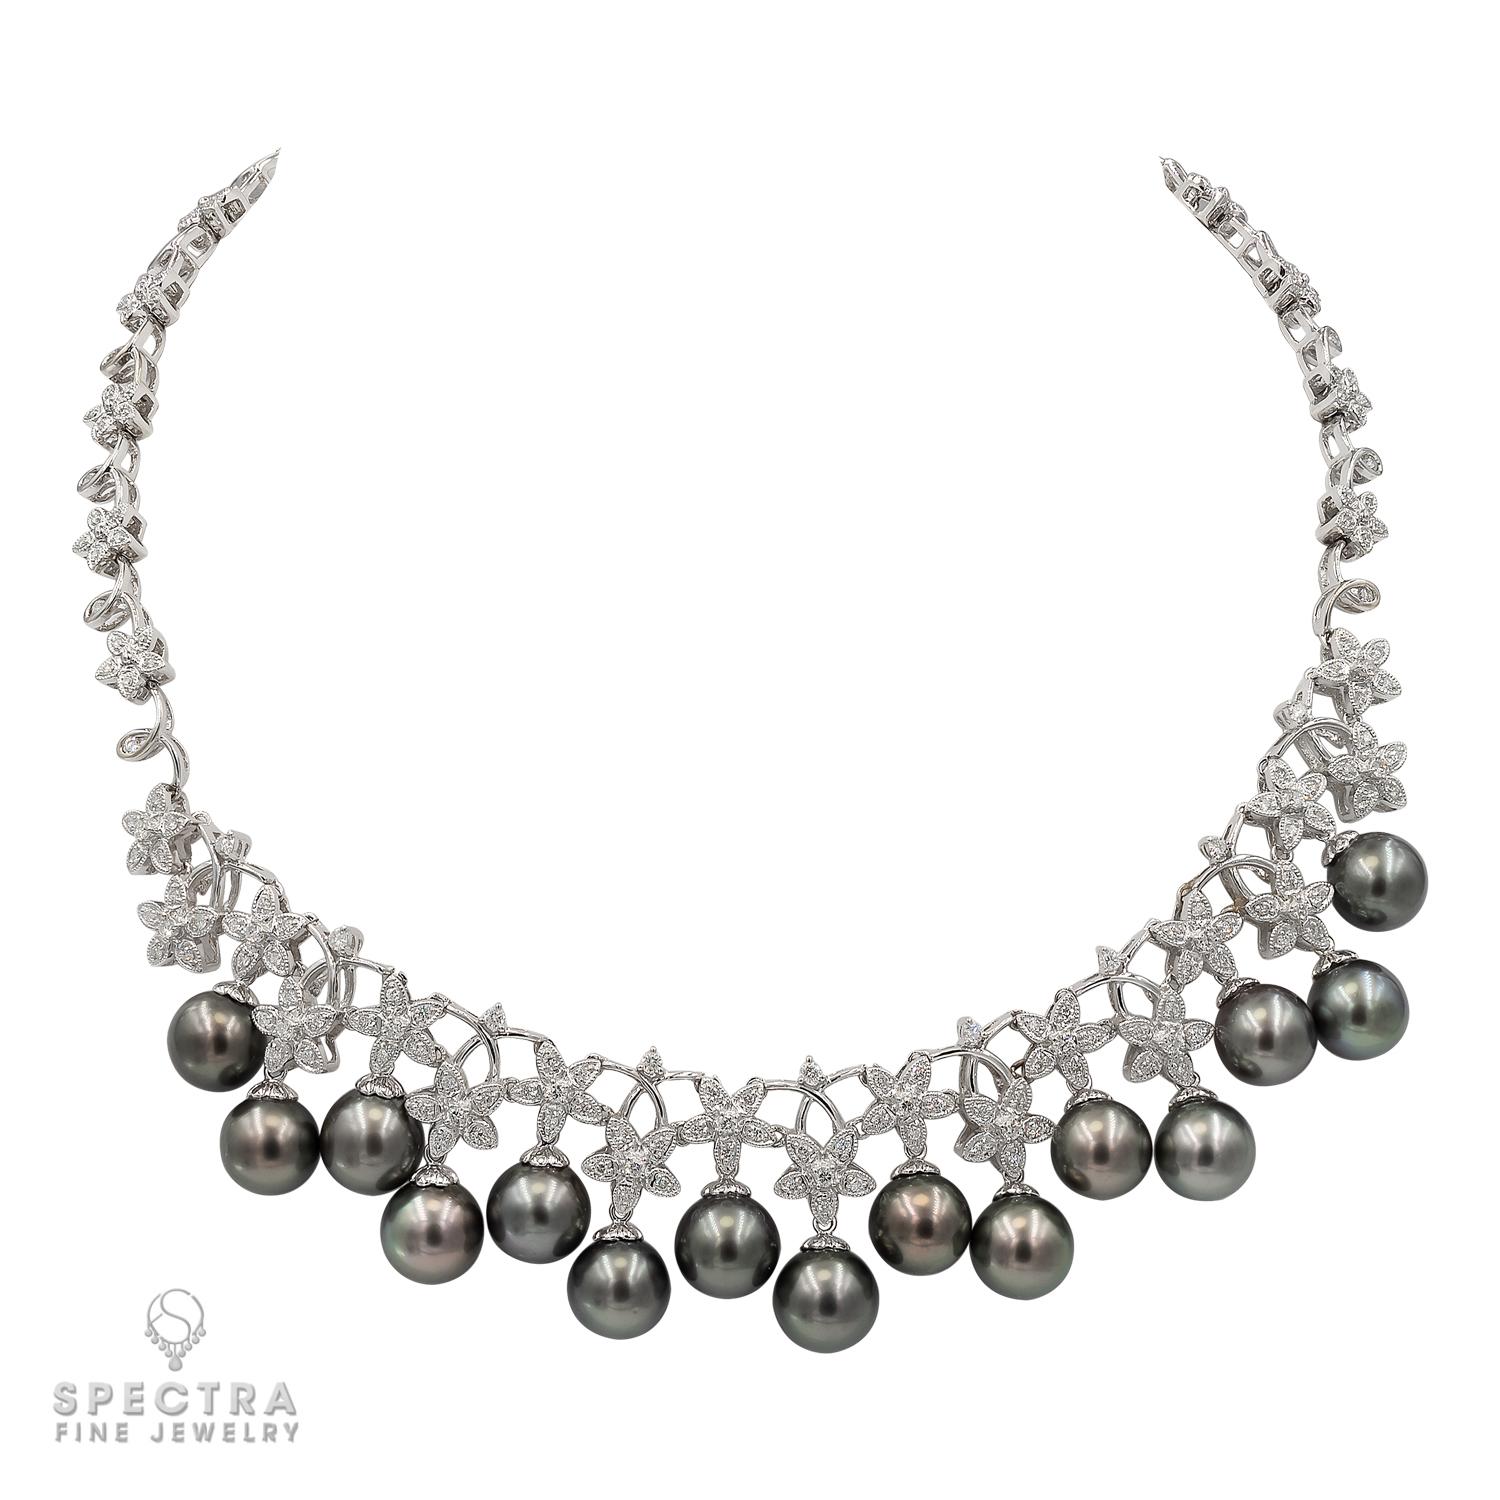 Contemporary Diamond Floral Garland and Tahitian Pearl Necklace